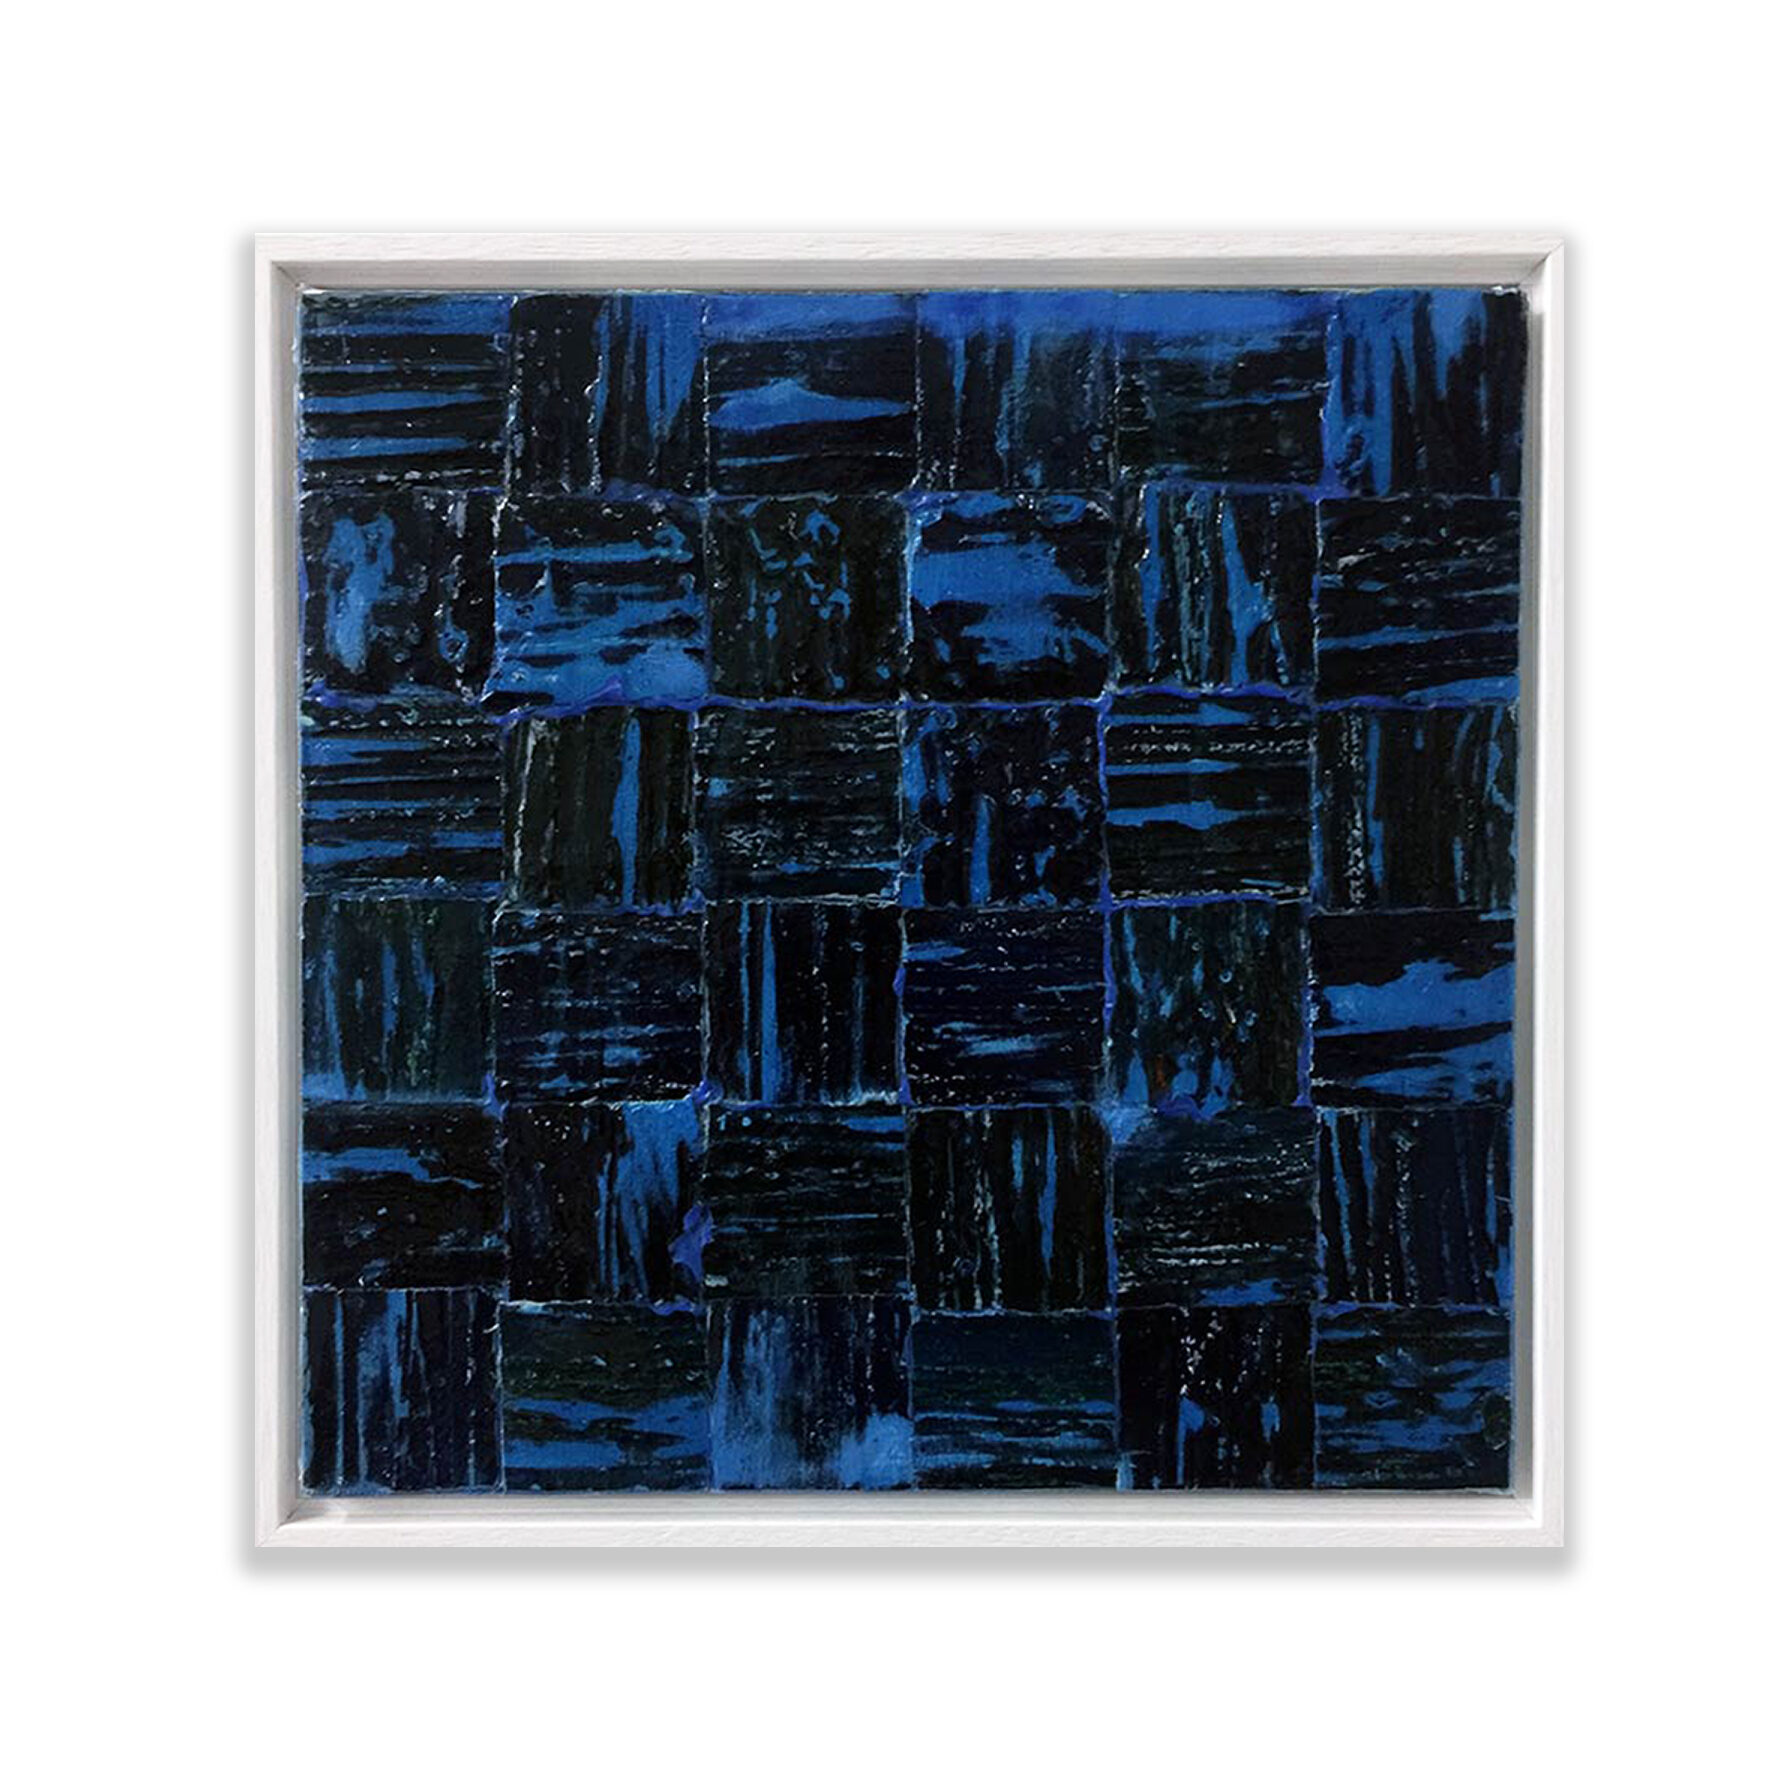 SOLD: Madeleine Tuckfield-Carrano "Meta Tesserae: Midnights in Paris III”2017. Mixed Media on Canvas. Image size: 30x30cm. Framed size: 31x31cm (white). Contemporary Paintings Available Now View in Gallery & Online Artsite Contemporary Sydney